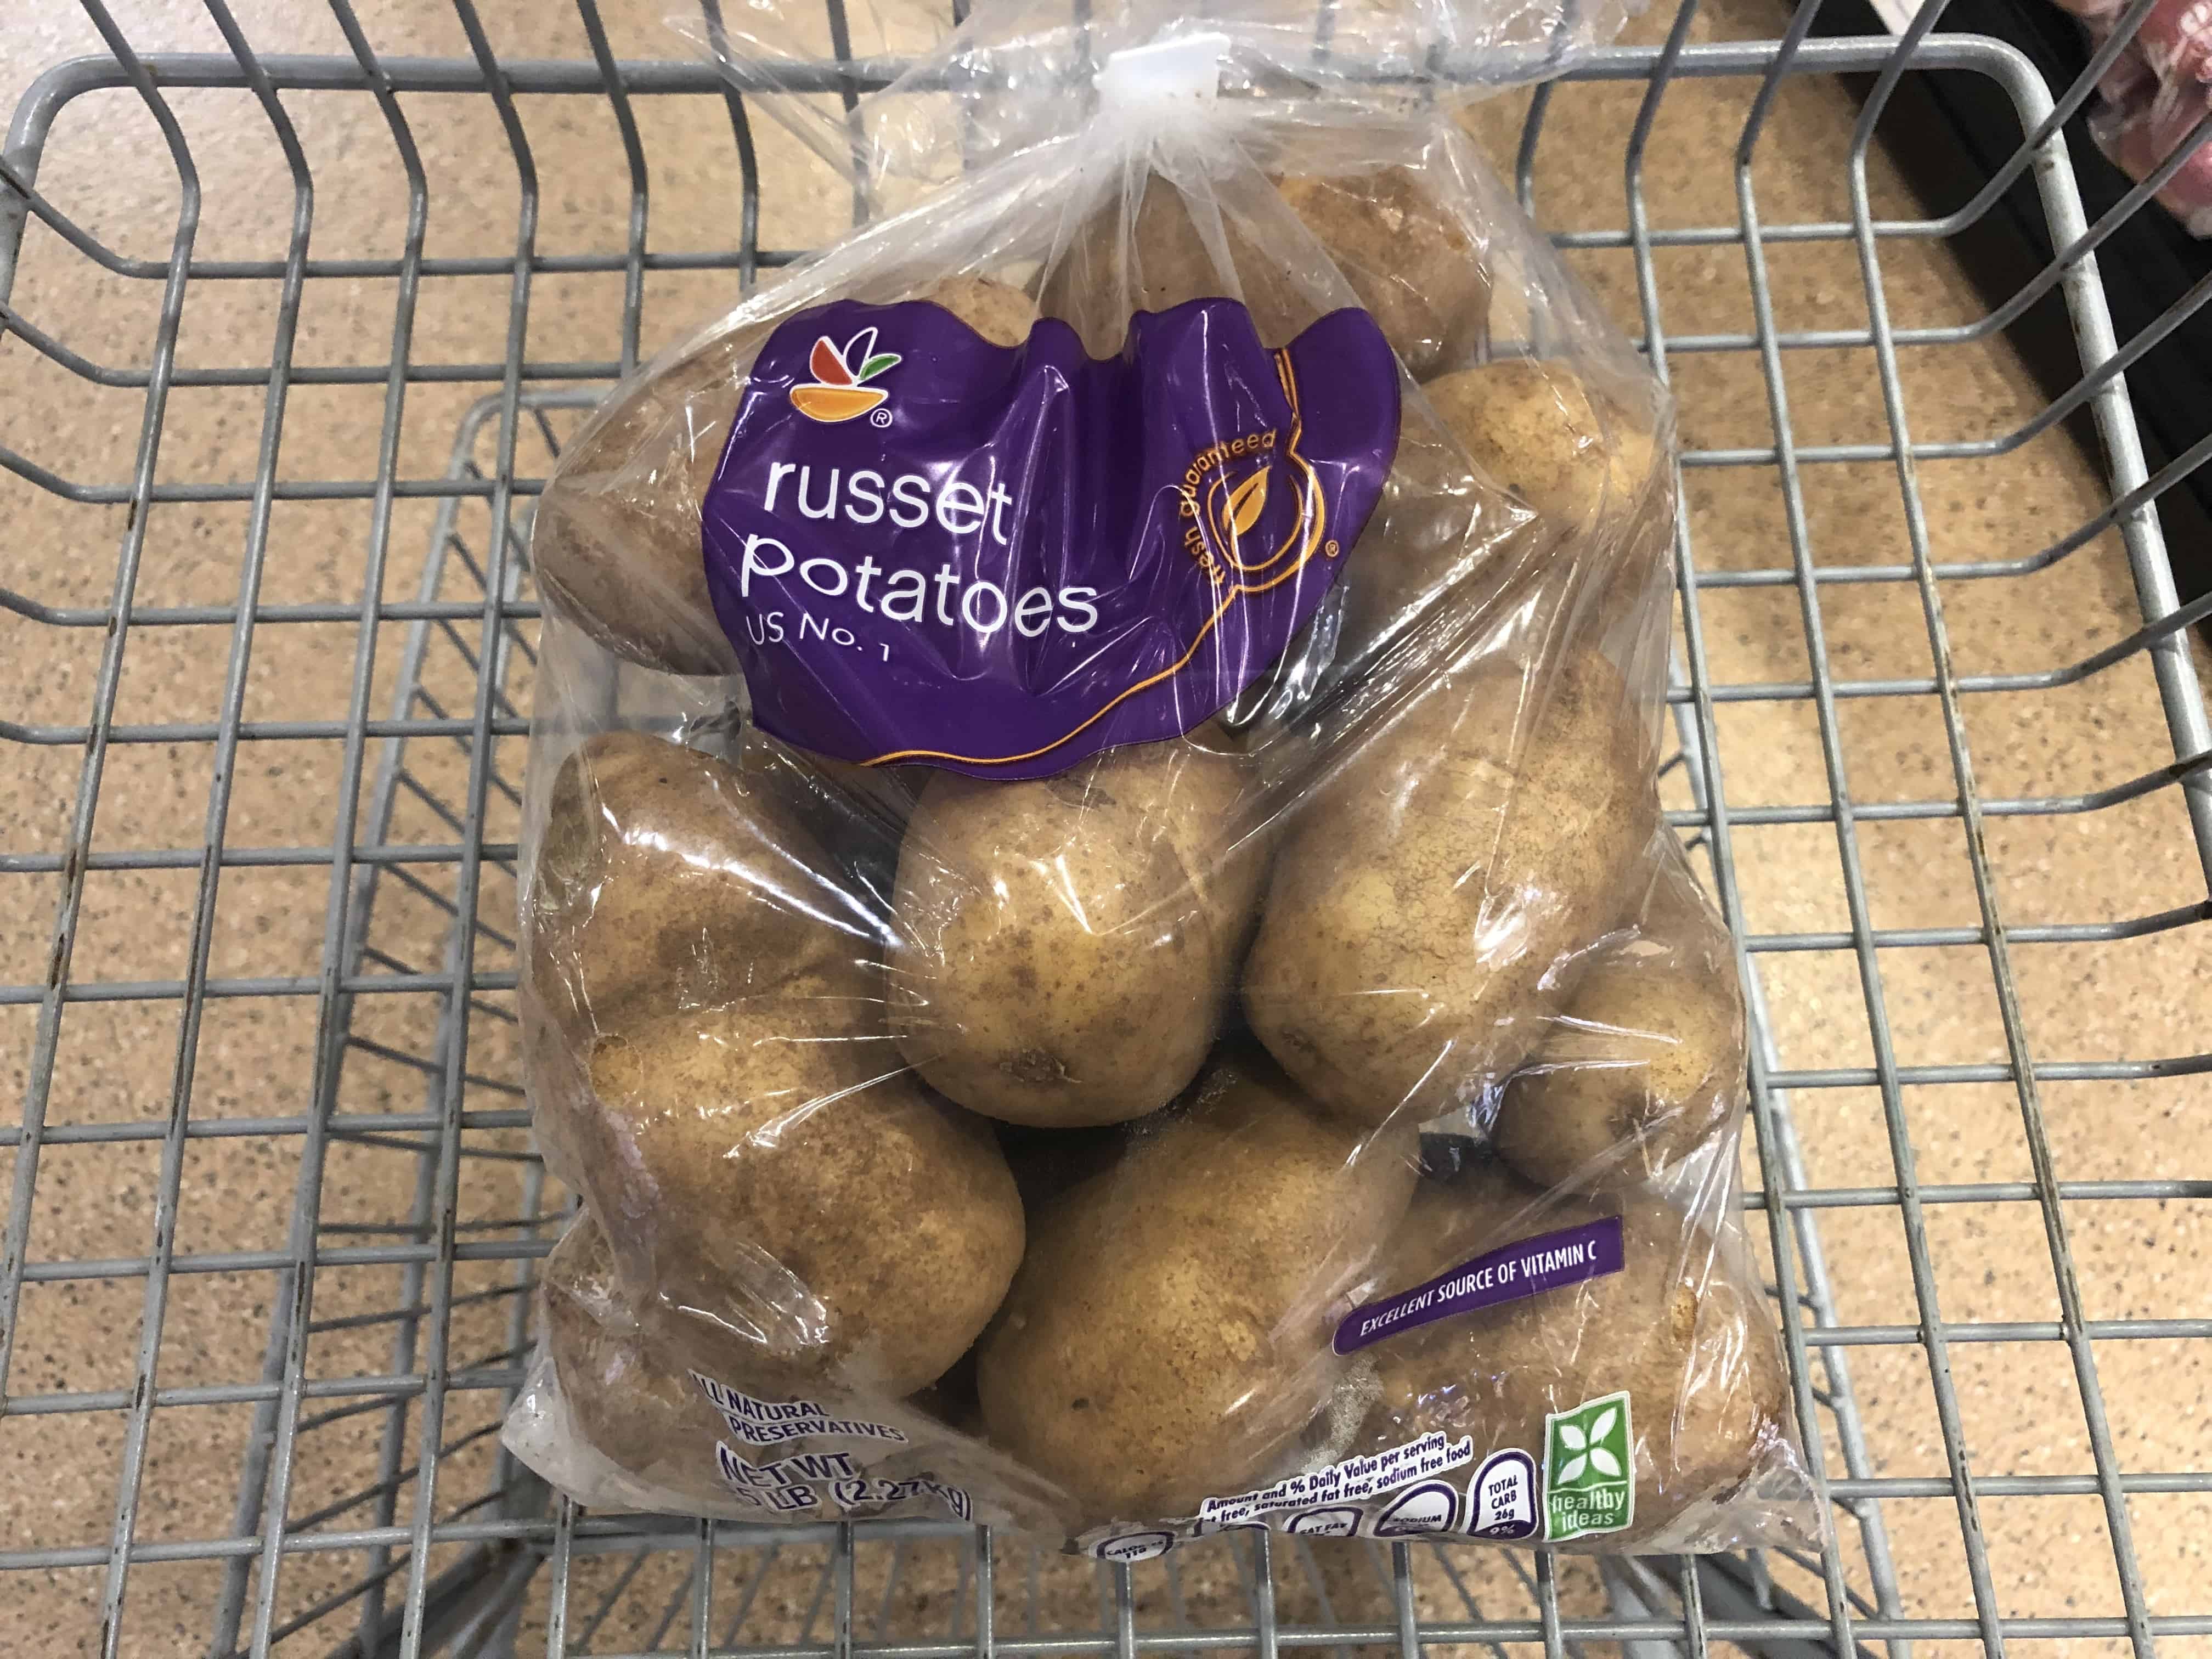 Giant: Giant Brand Russet Potatoes 5 Lb Bag ONLY $0.95 Starting 9/20!